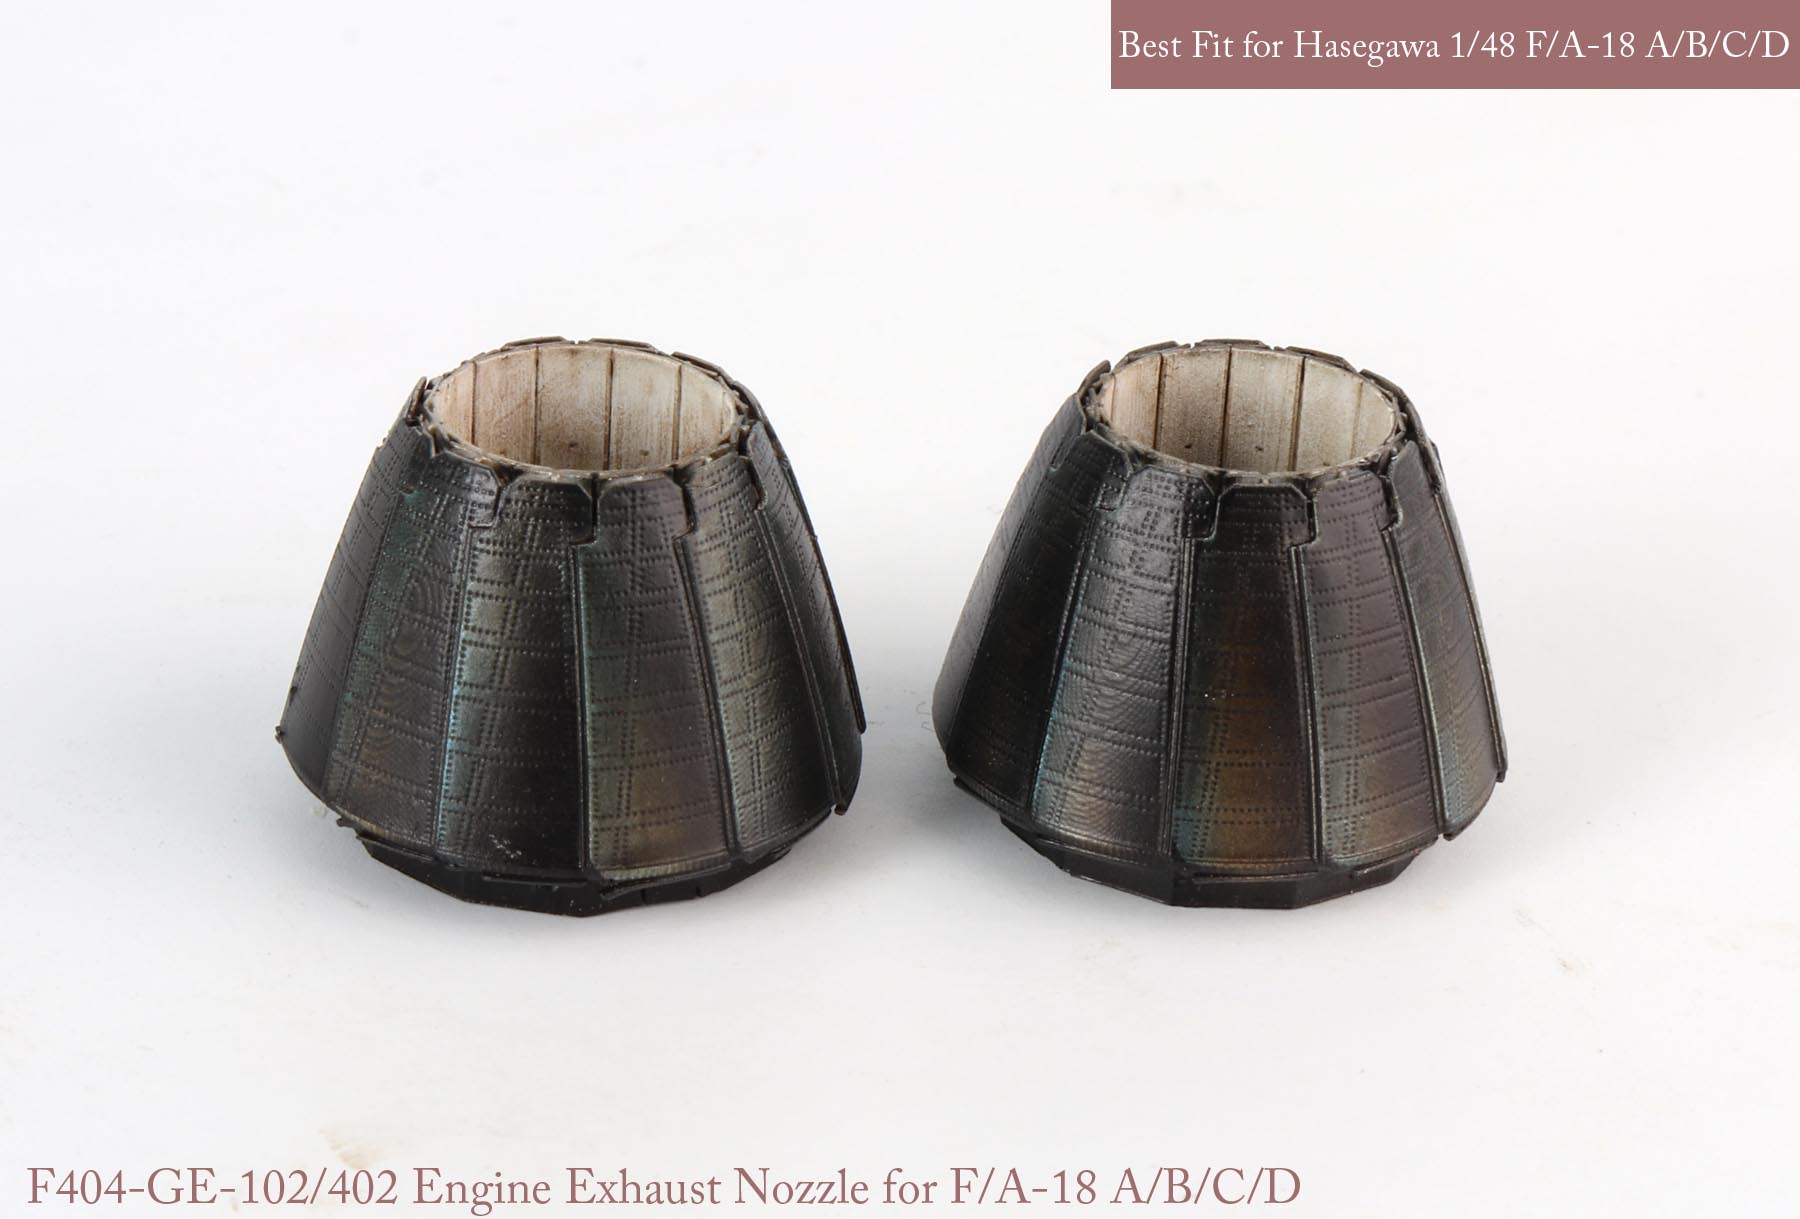 1/48 F/A-18A/B/C/D GE Nozzle Set (Closed) for Hasegawa - Click Image to Close